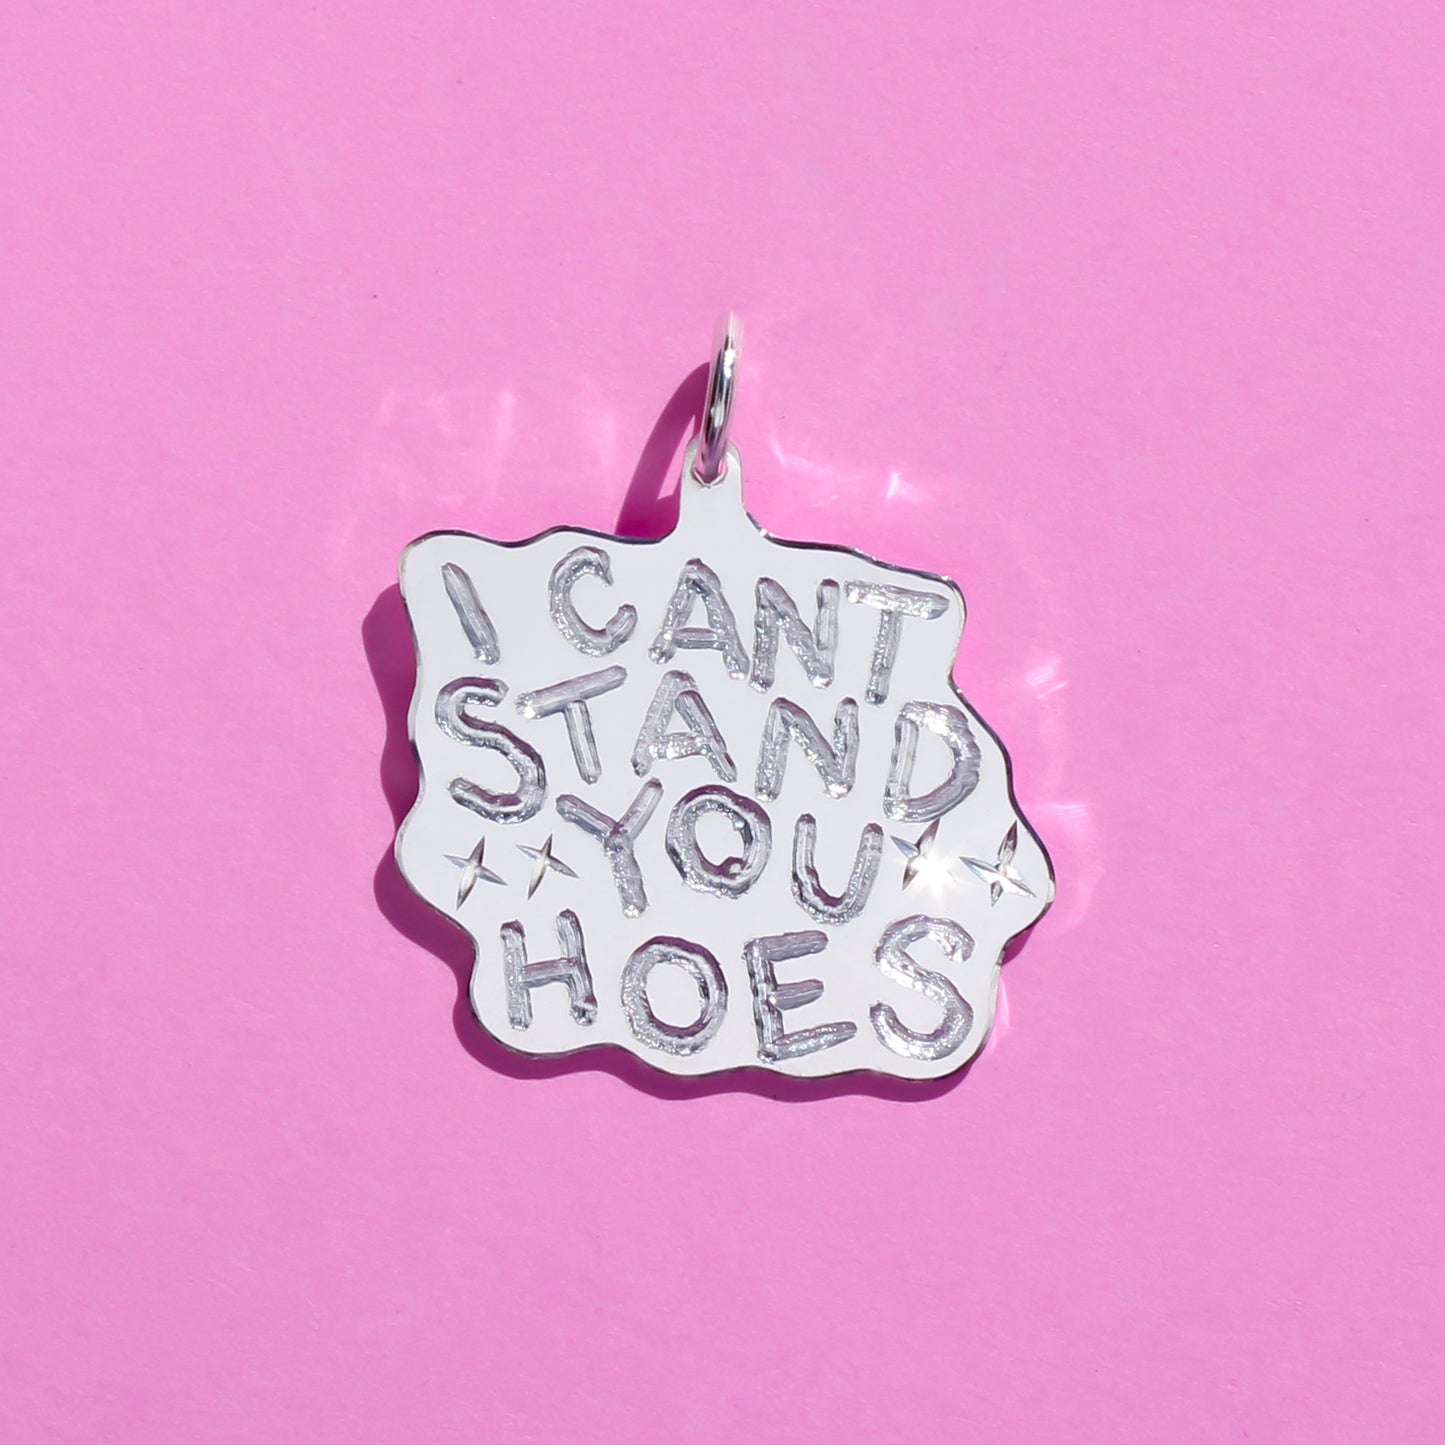 I CAN'T STAND YOU HOES pendant preorder